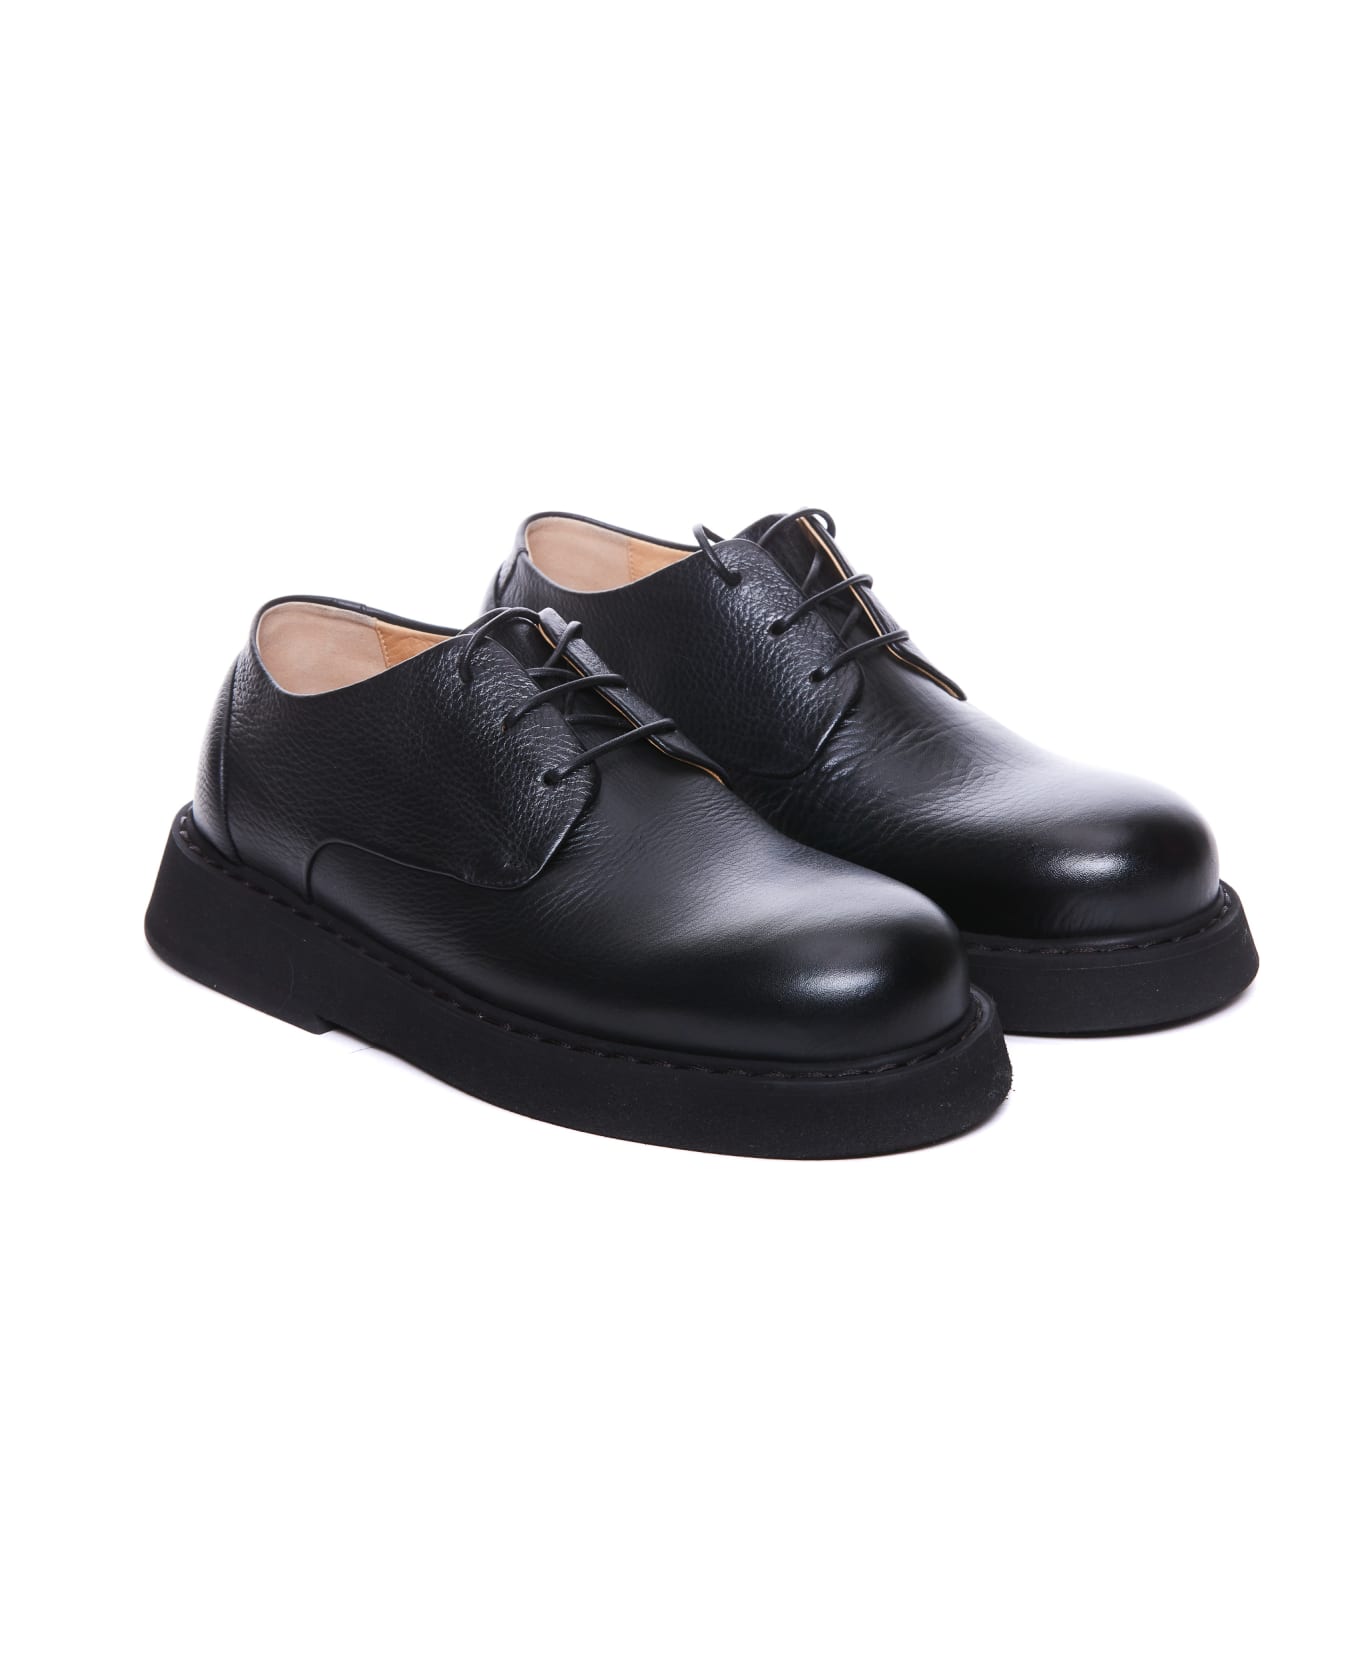 Marsell Spalla Derby Laced Up Shoes - Black ローファー＆デッキシューズ